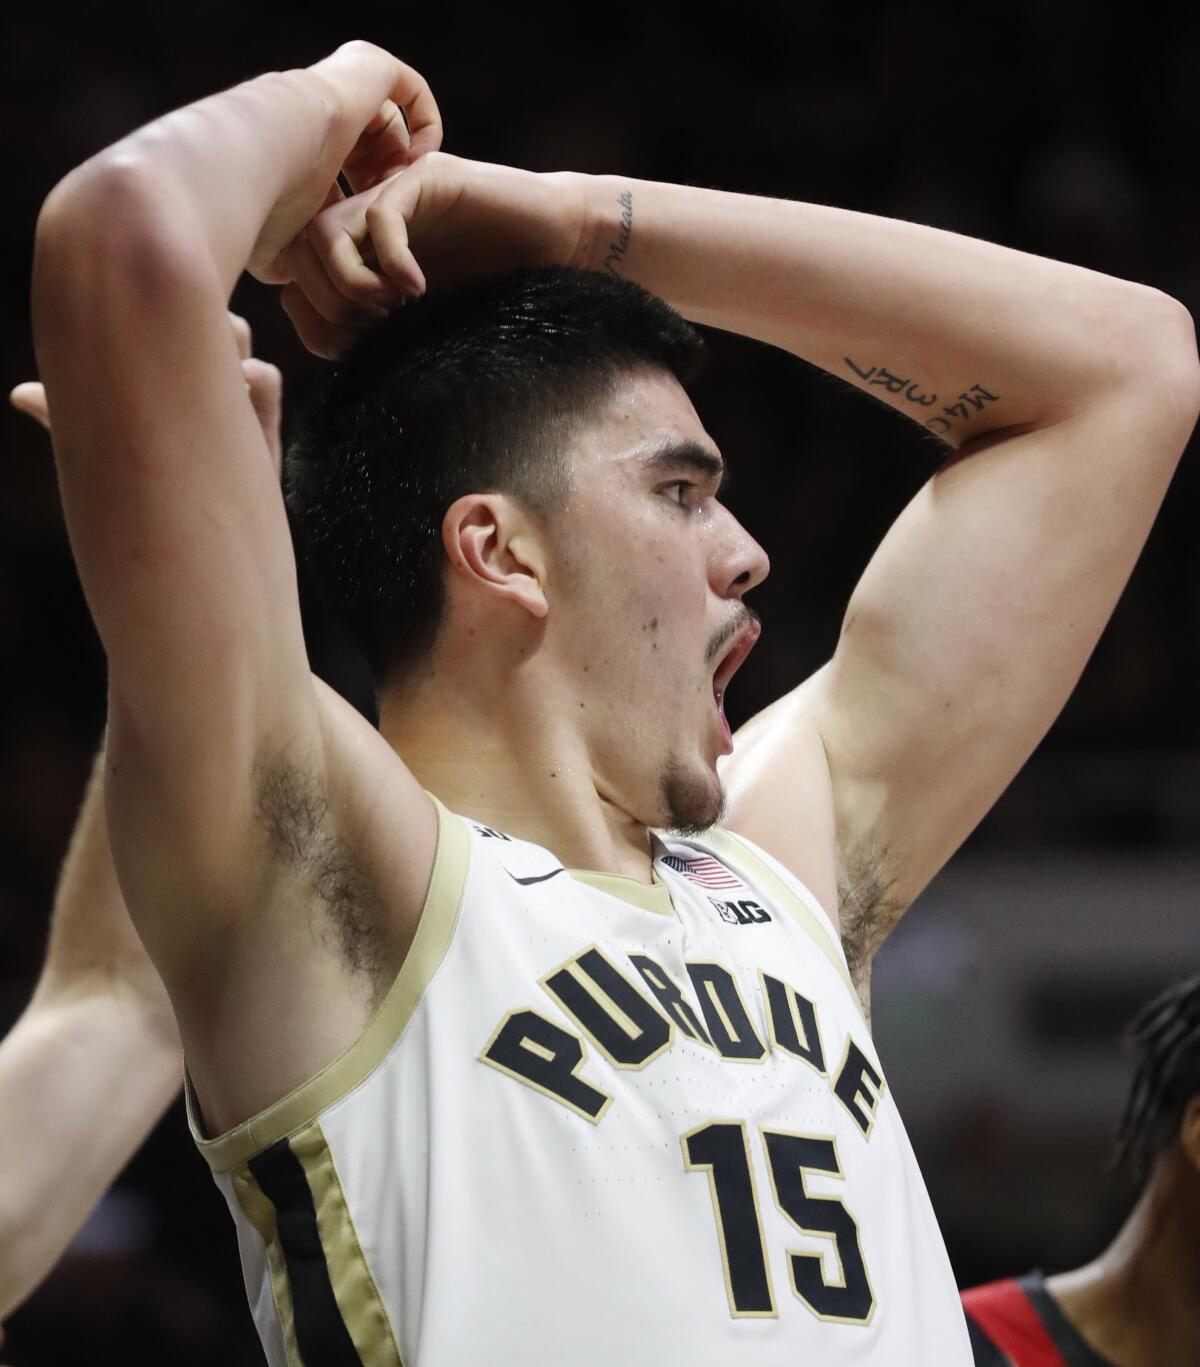 Purdue center Zach Edey (15) reacts to a foul call during the team's NCAA college basketball game against Austin Peay on Friday, Nov. 11, 2022, in West Lafayette, Ind. (Alex Martin/Journal & Courier via AP)